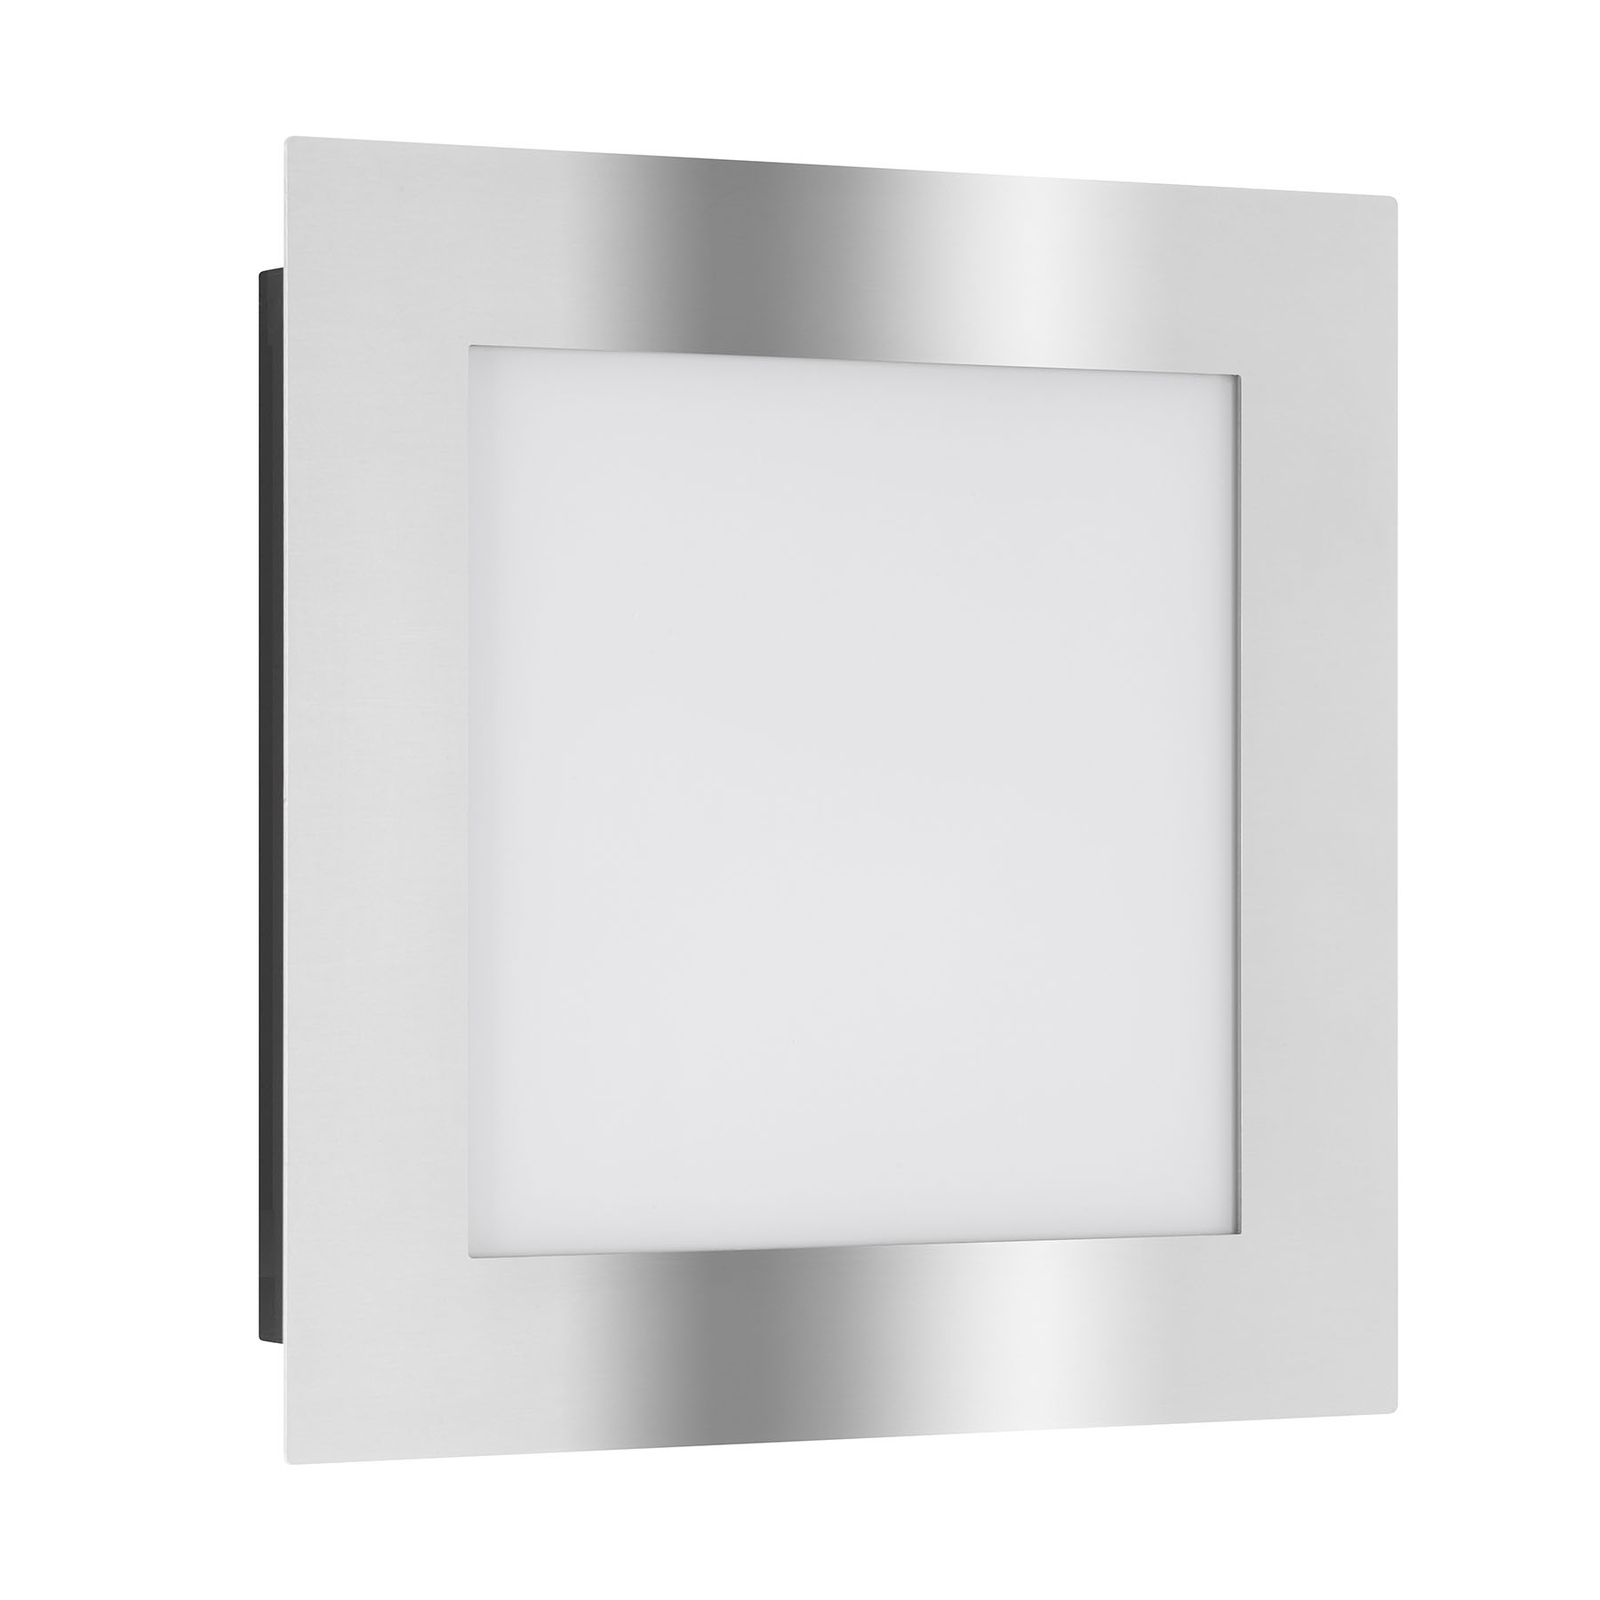 3006 LED outdoor wall light, stainless steel